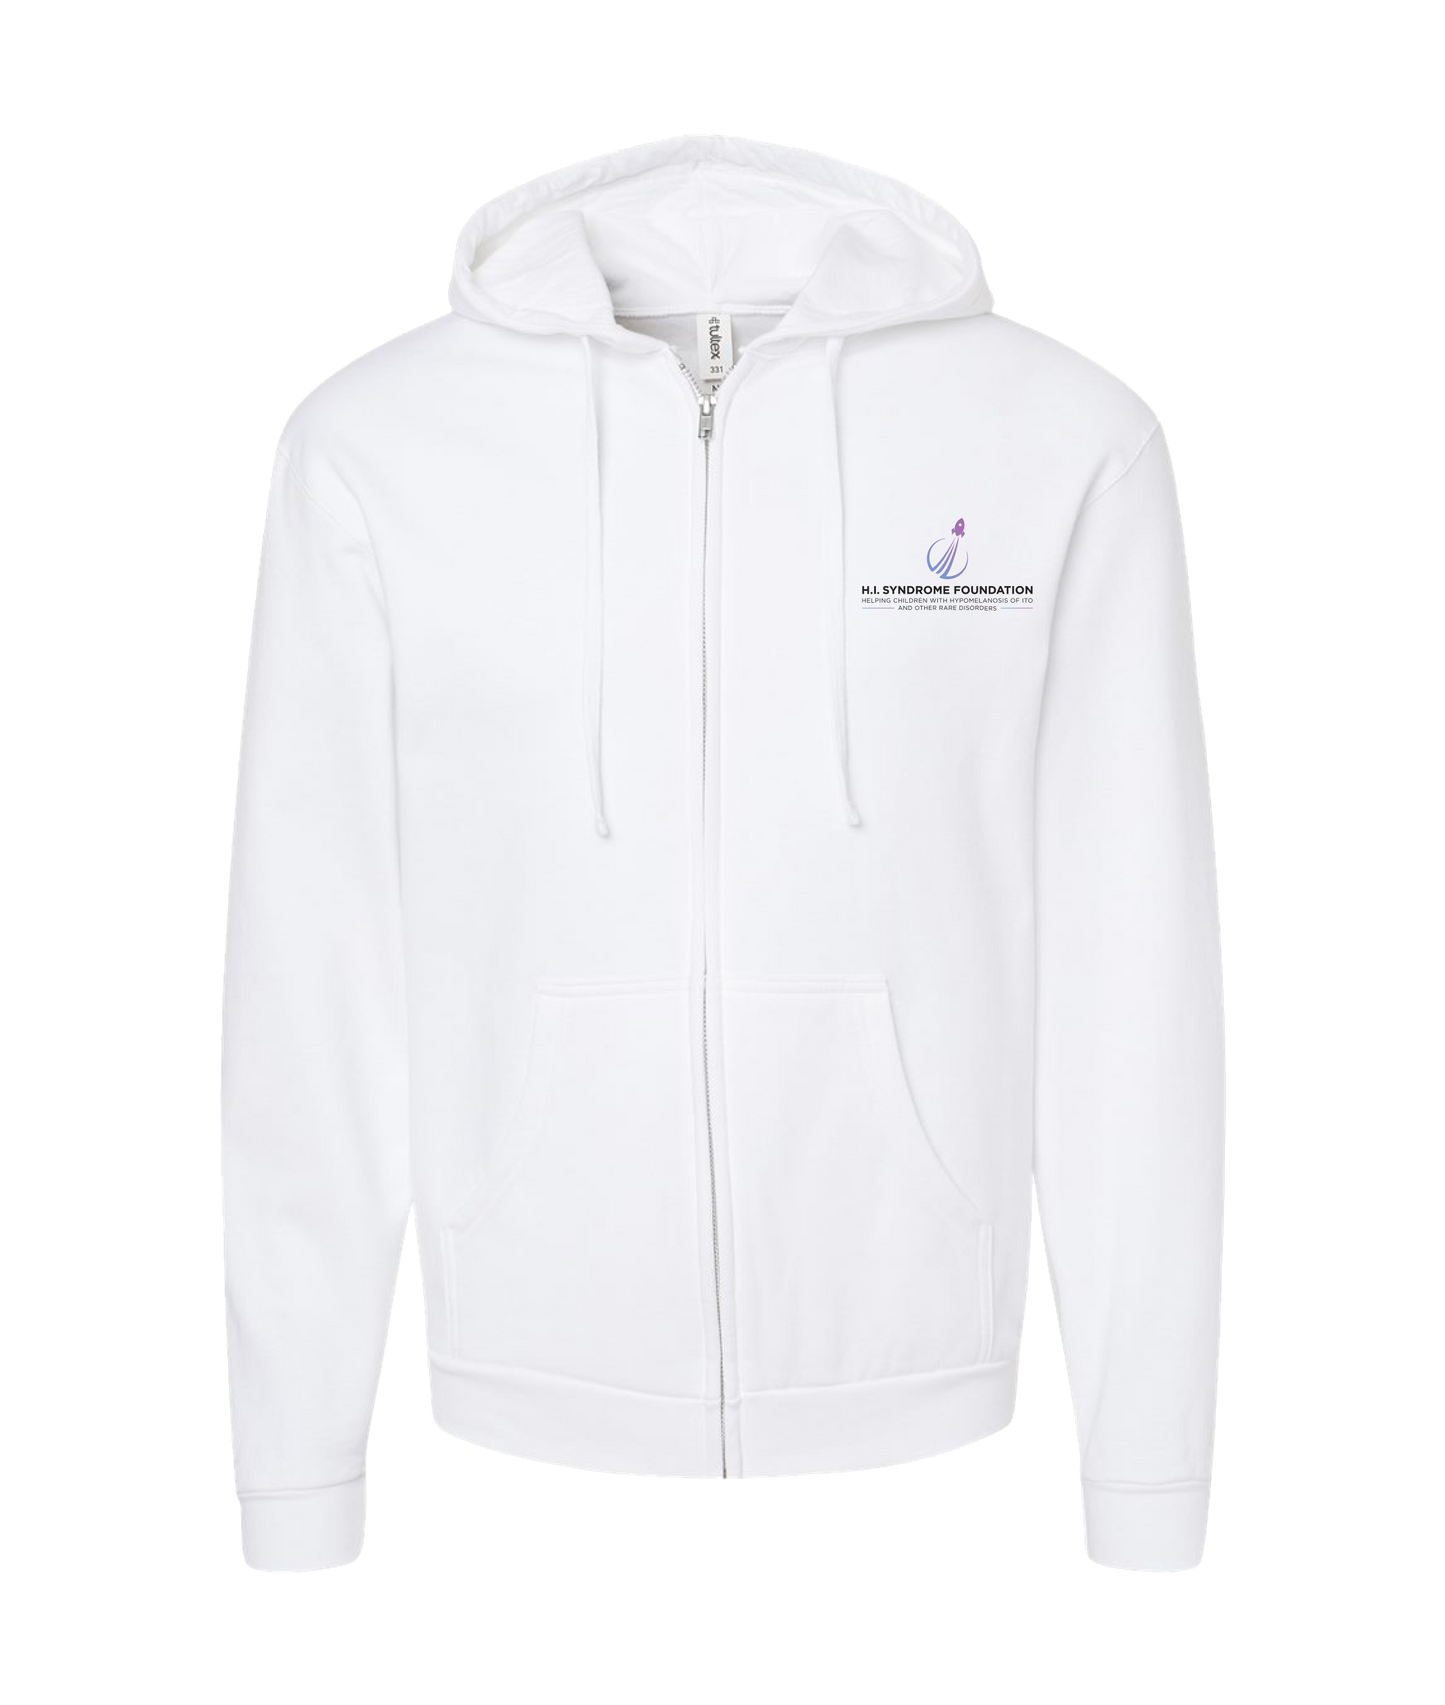 H.I Syndrome Foundation - DESIGN 1 - White Zip Up Hoodie